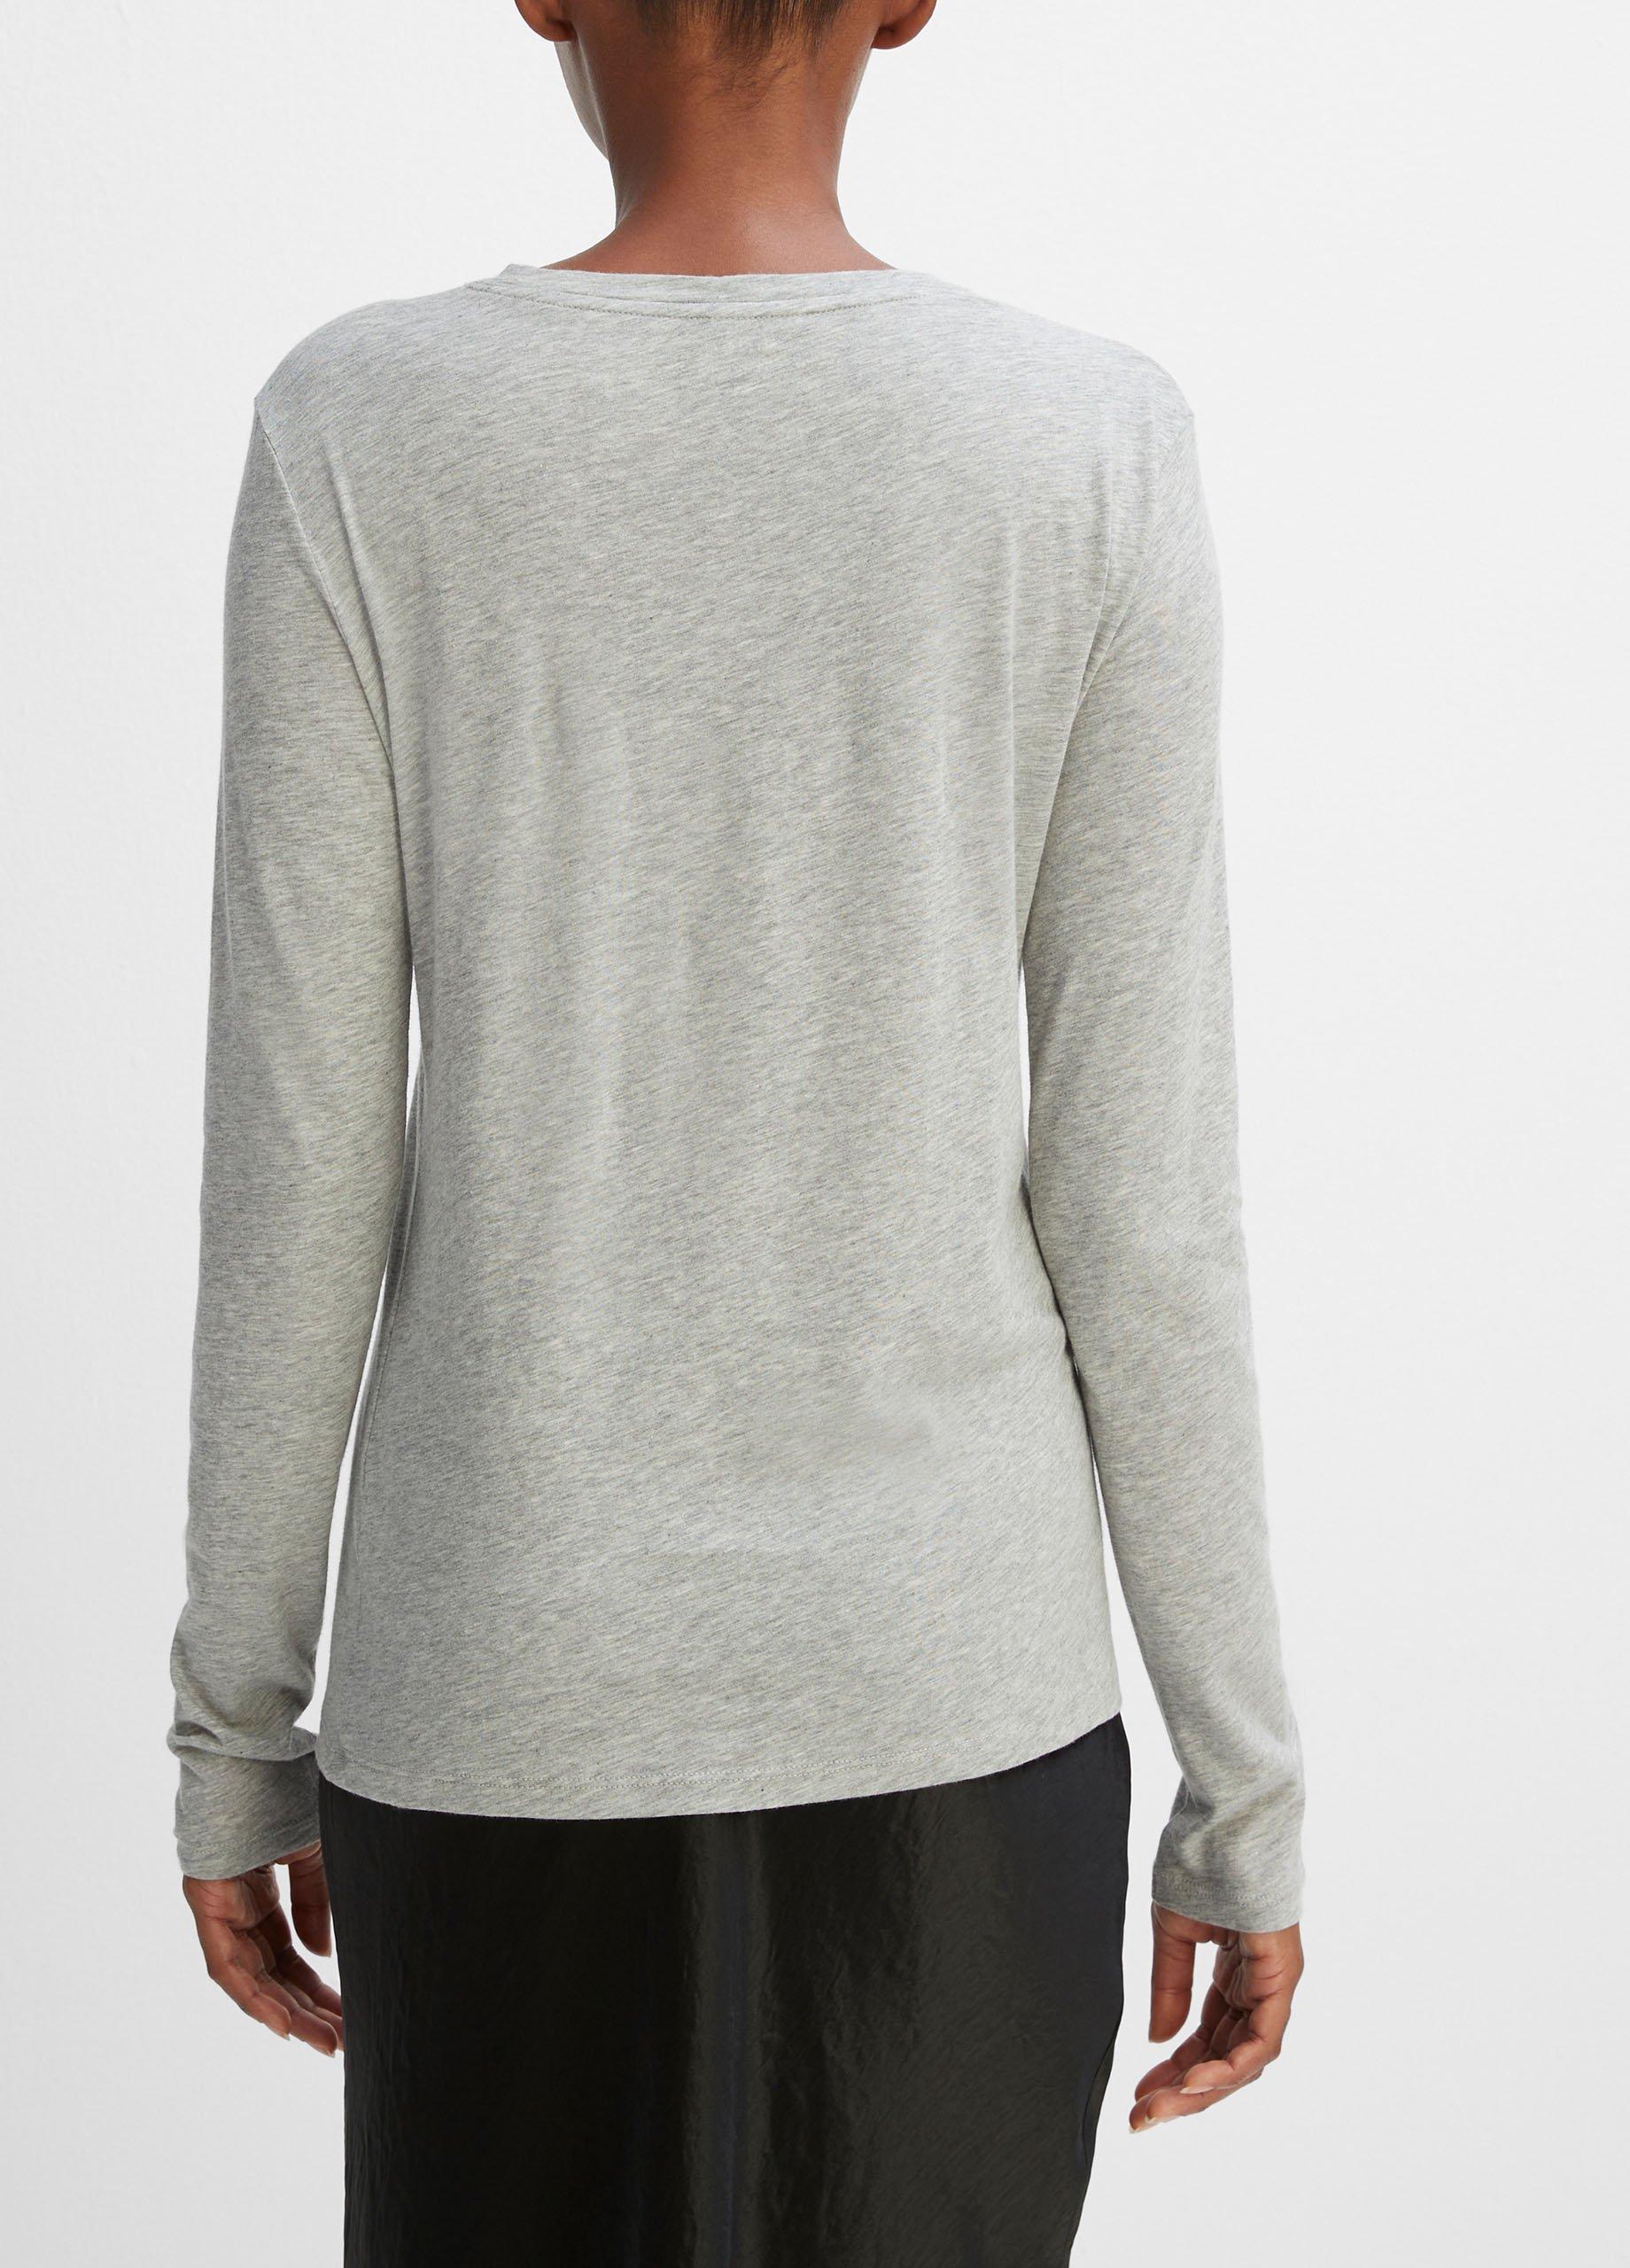 Essential Long Sleeve Crew Neck T-Shirt in Long Sleeve